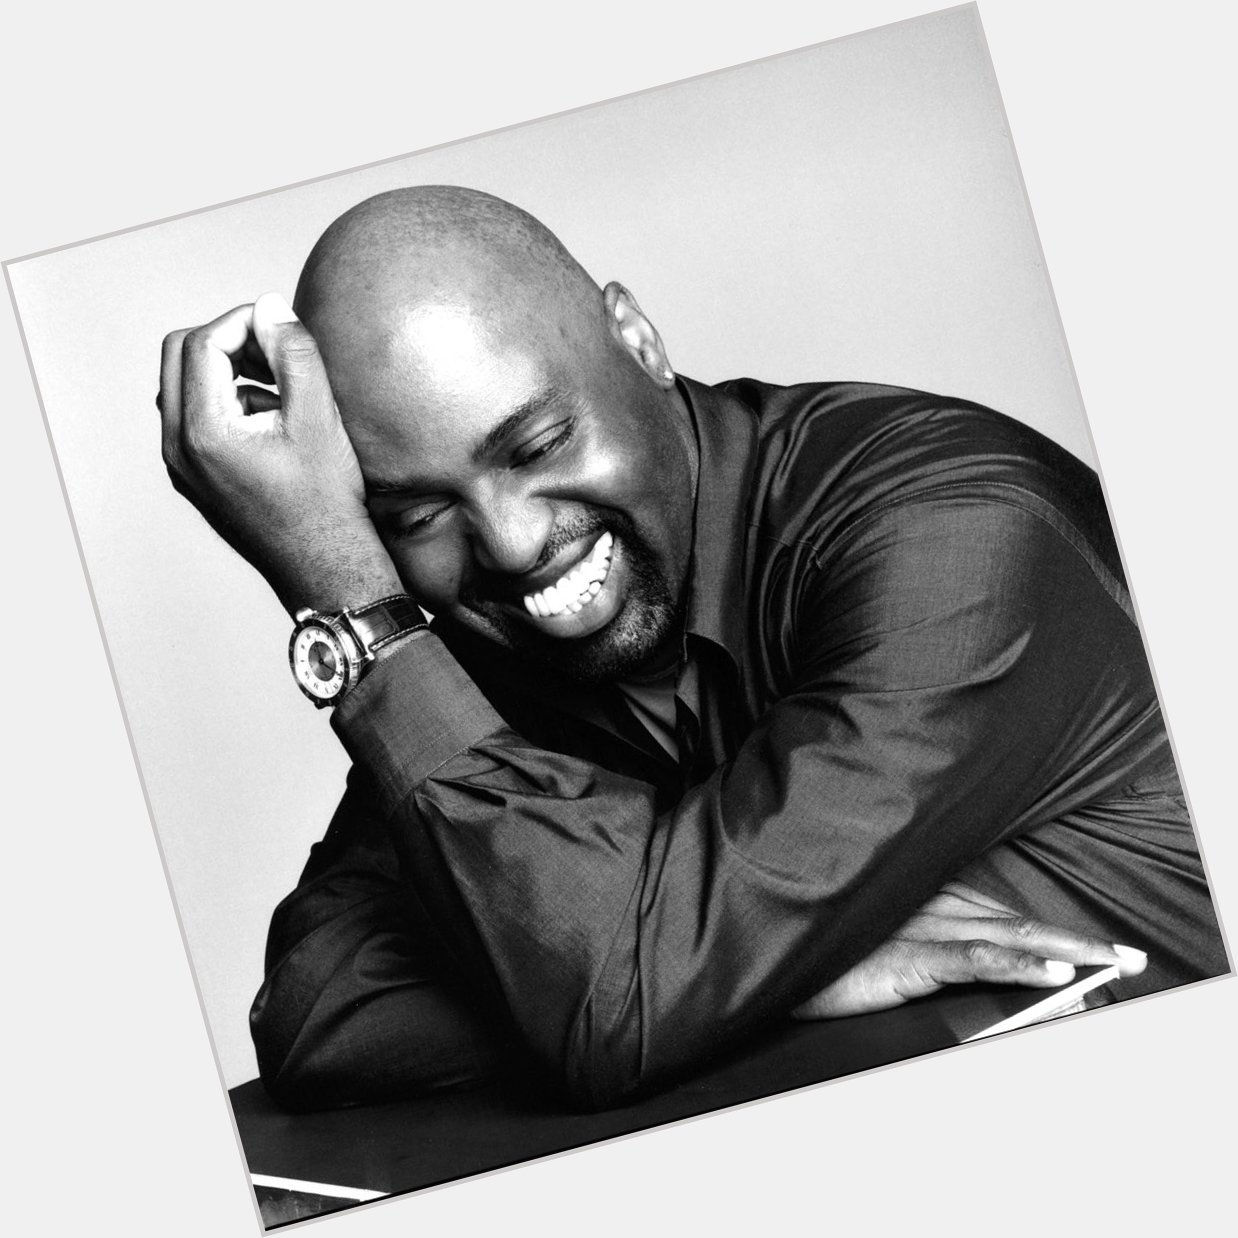 Frankie Knuckles would have been 62 today.
Happy birthday \godfather\, not forgotten R.I.P. 